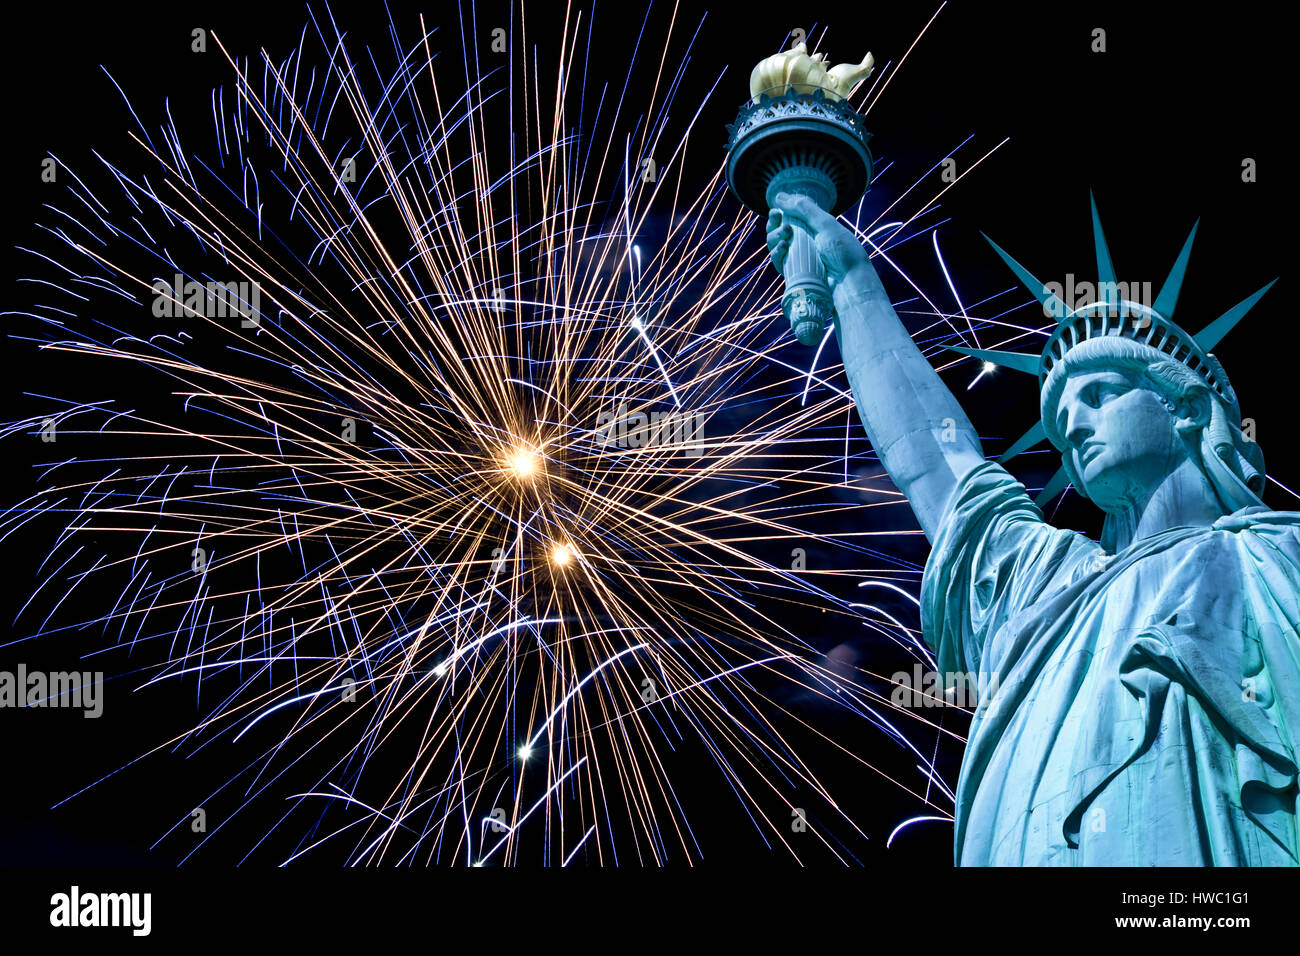 Statue of Liberty, night sky with fireworks, New York, USA Stock Photo